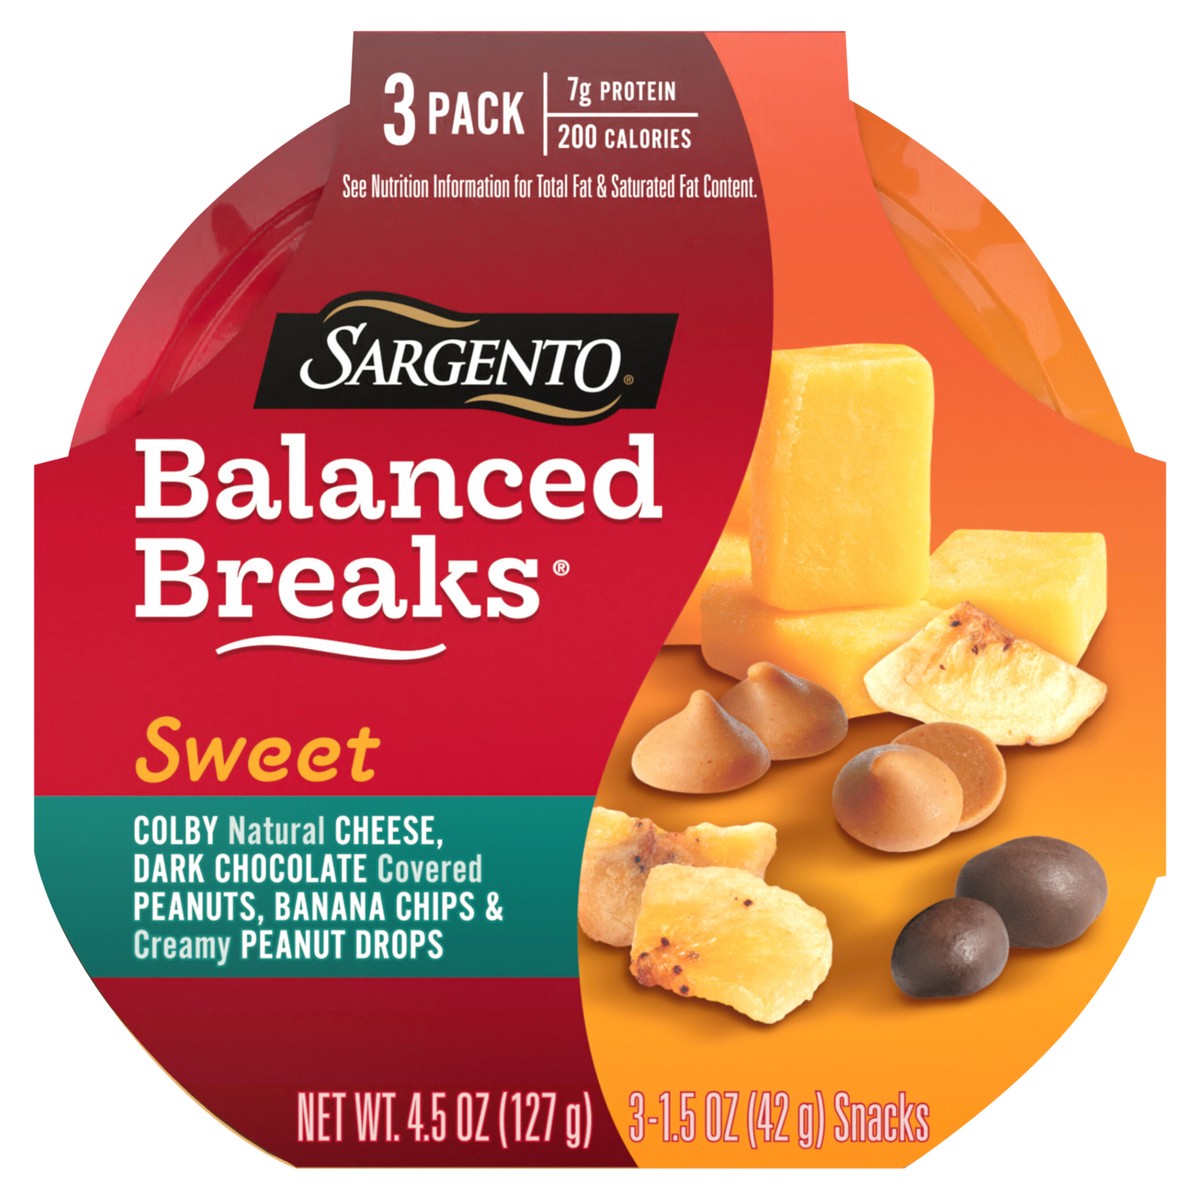 slide 1 of 17, Sargento Sweet Balanced Breaks with Colby Natural Cheese, Dark Chocolate Covered Peanuts, Banana Chips and Creamy Peanut Drops, 1.5 oz., 3-Pack, 4.5 oz